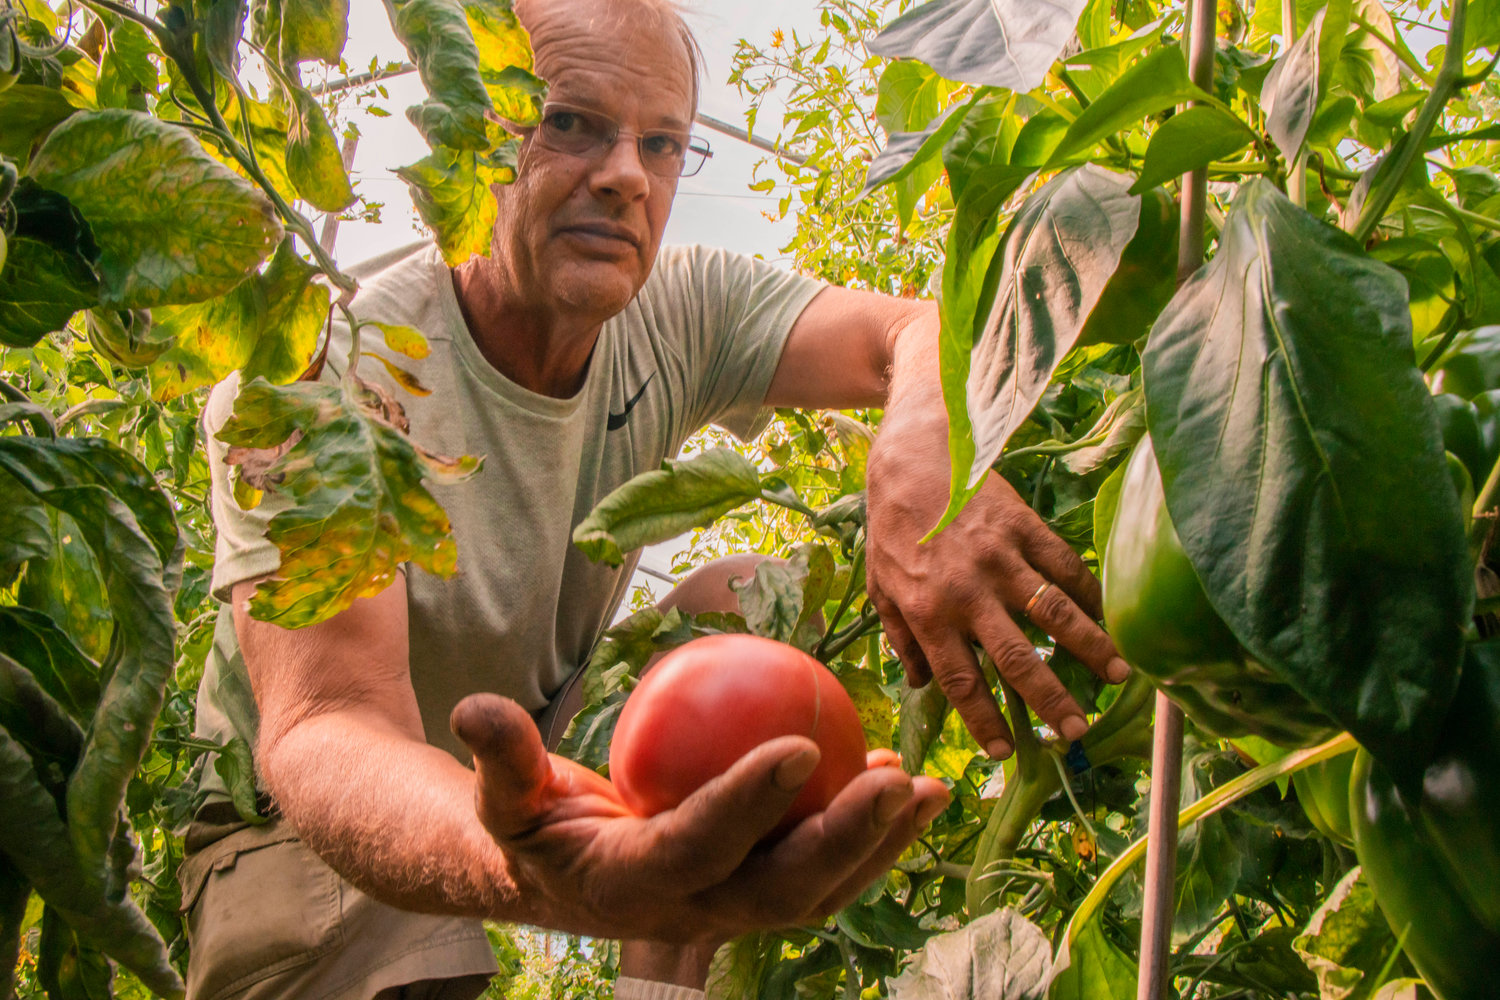 Burke Deming holds up a Bigdena Tomato in a greenhouse he built, Tuesday morning at Olequa Farm in Winlock.